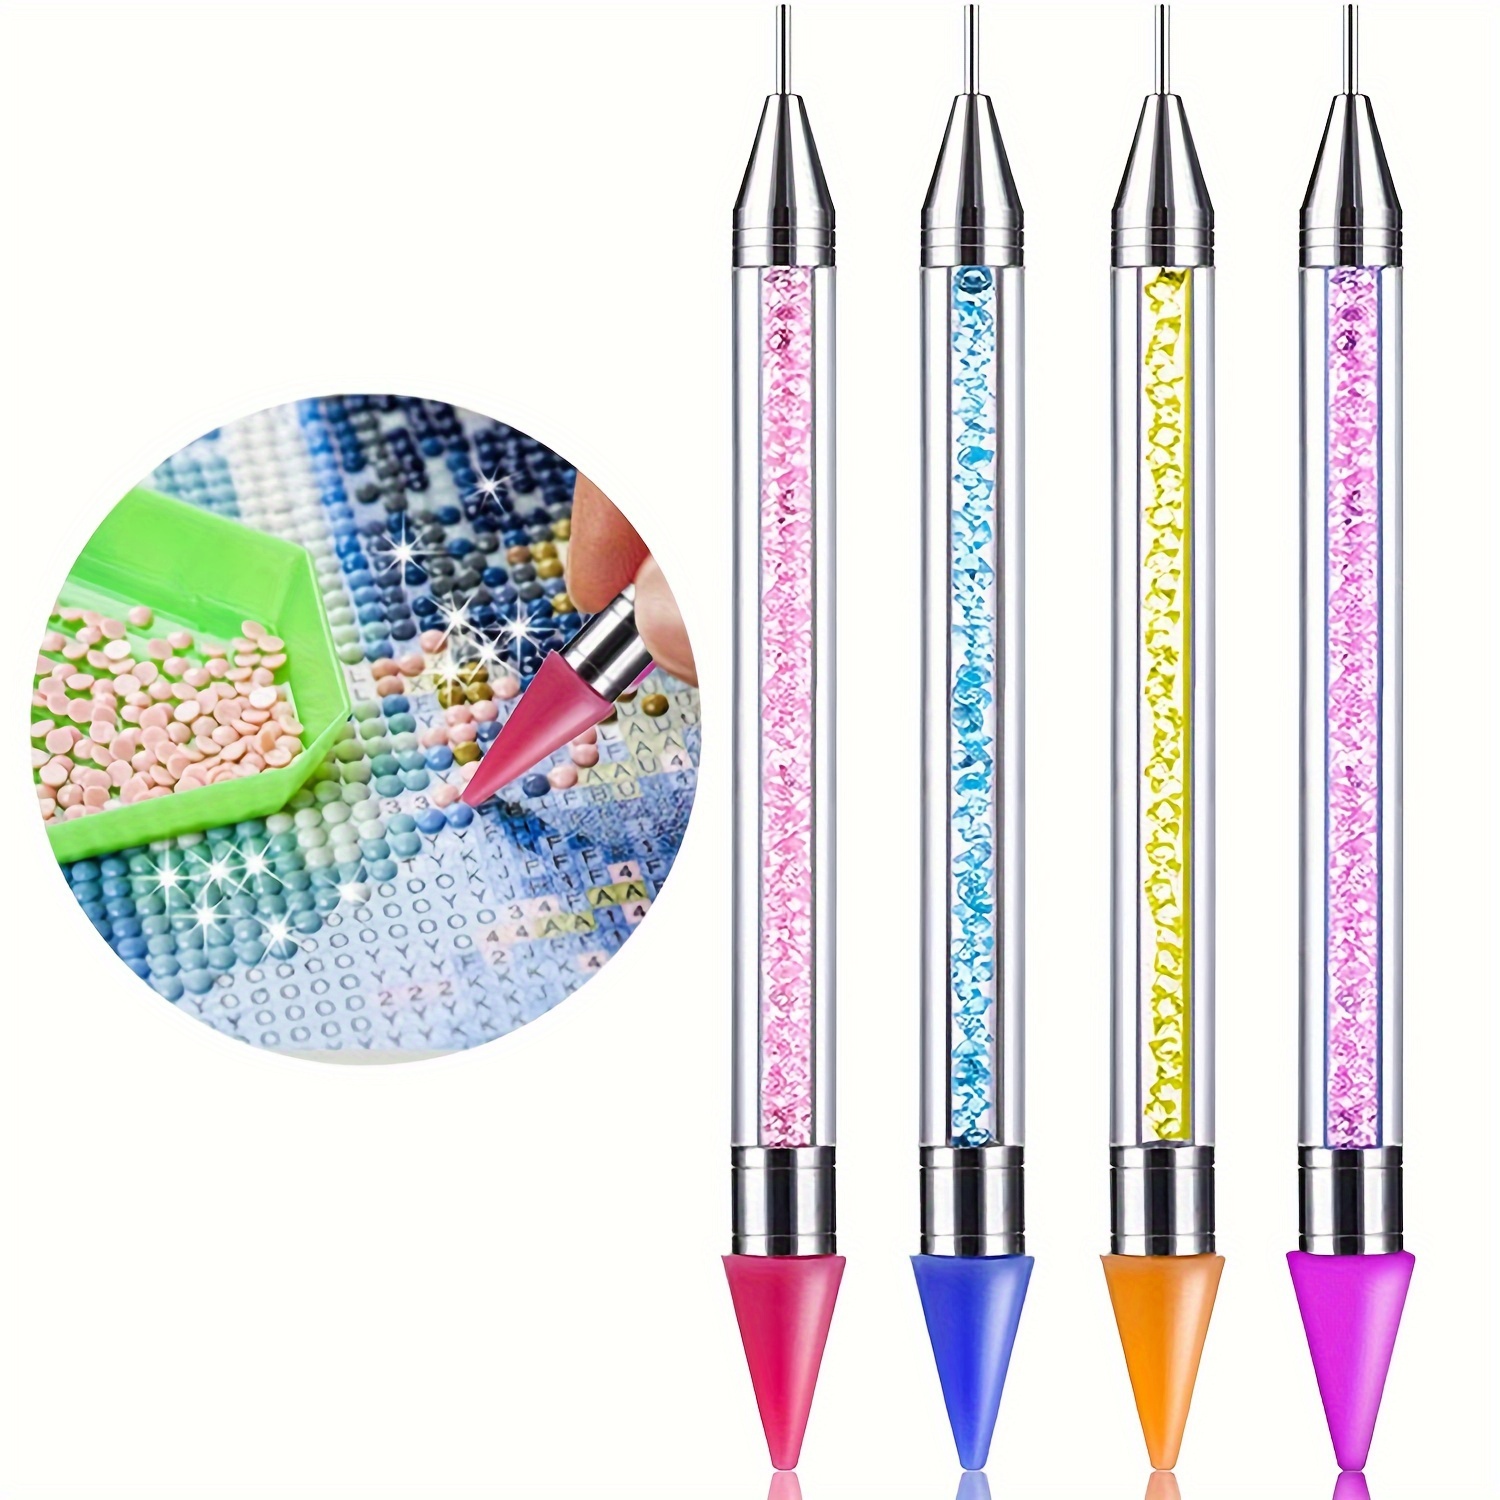  Diamond Painting Accessories & Art Tool Supplies-60PCS Colorful Diamond  Painting Glue Clay-DIY Drilling Mud Embroidery Wax Tacky Kit-Glue Dot Clay  Paint Pen for Craft 5D Cross(3 Stitch Pen,1 Tray)